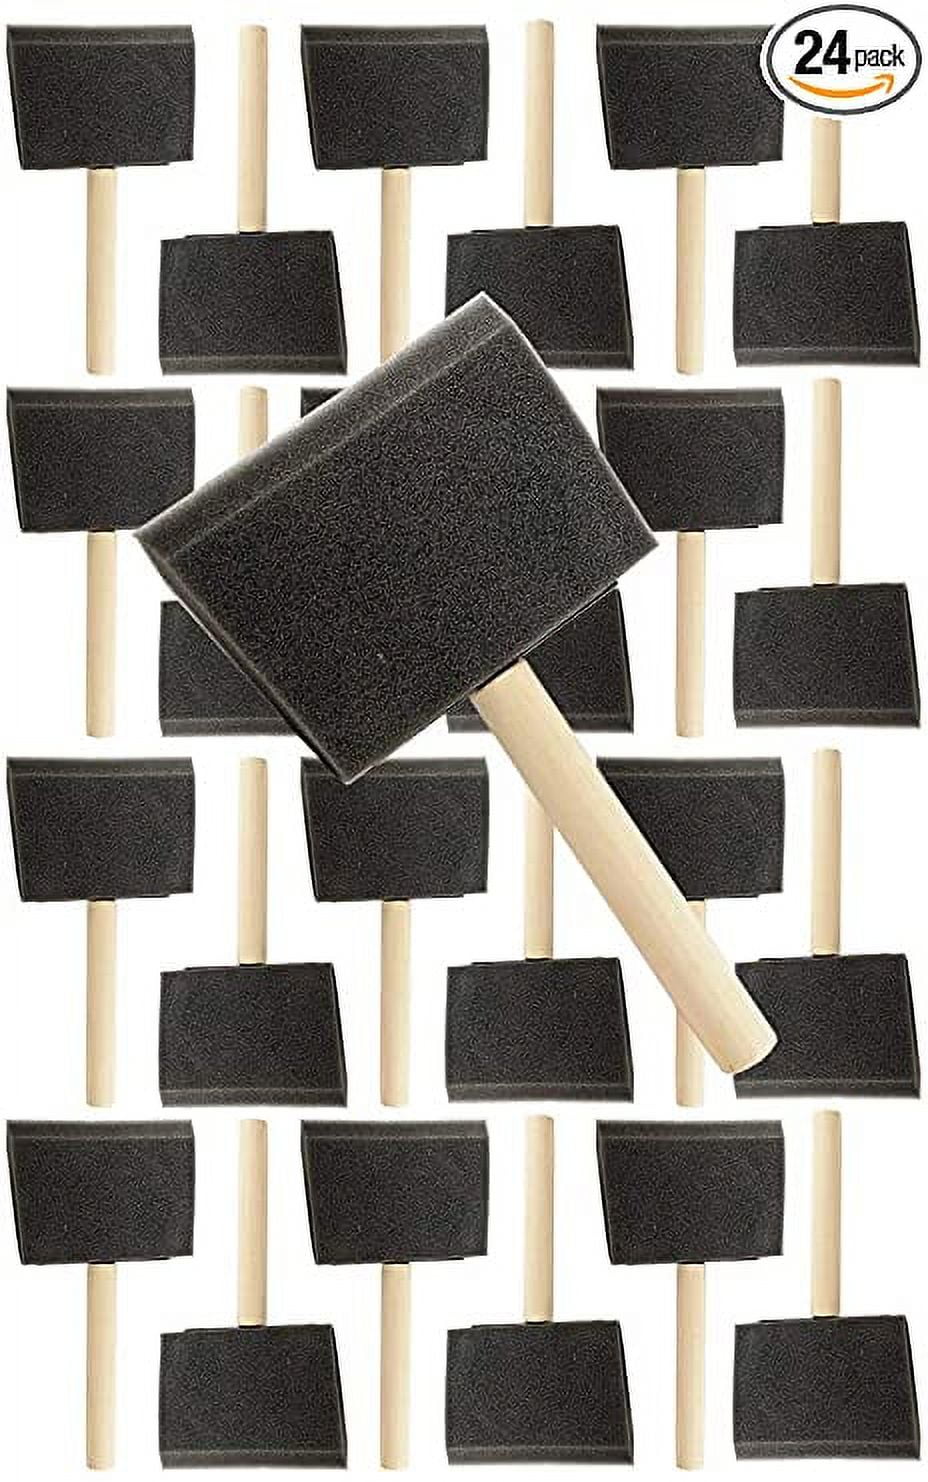 60-Pack of Foam Paint Brushes with Wooden Handle, 2 inch Sponge Brush for Painting, Acrylics, Stains, Classroom Arts and Crafts, DIY Projects, Varnis